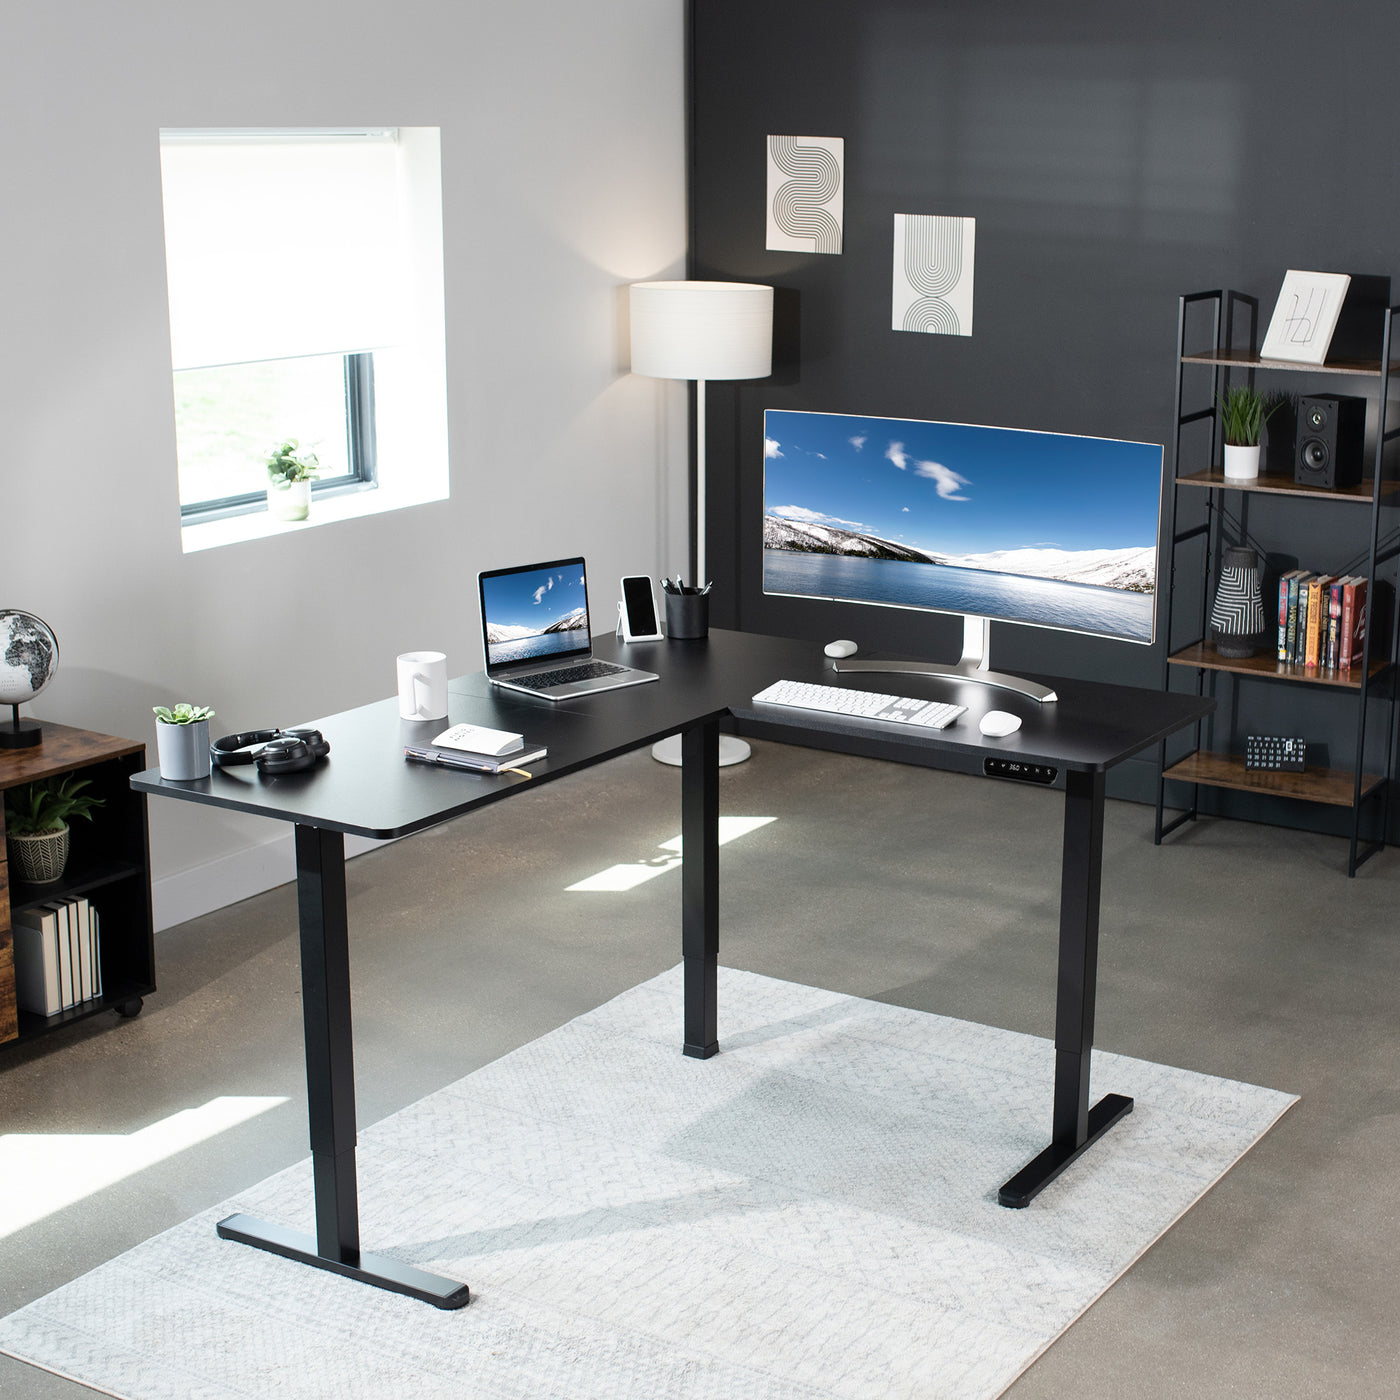 Large heavy-duty electric workstation desk centered in a room. 